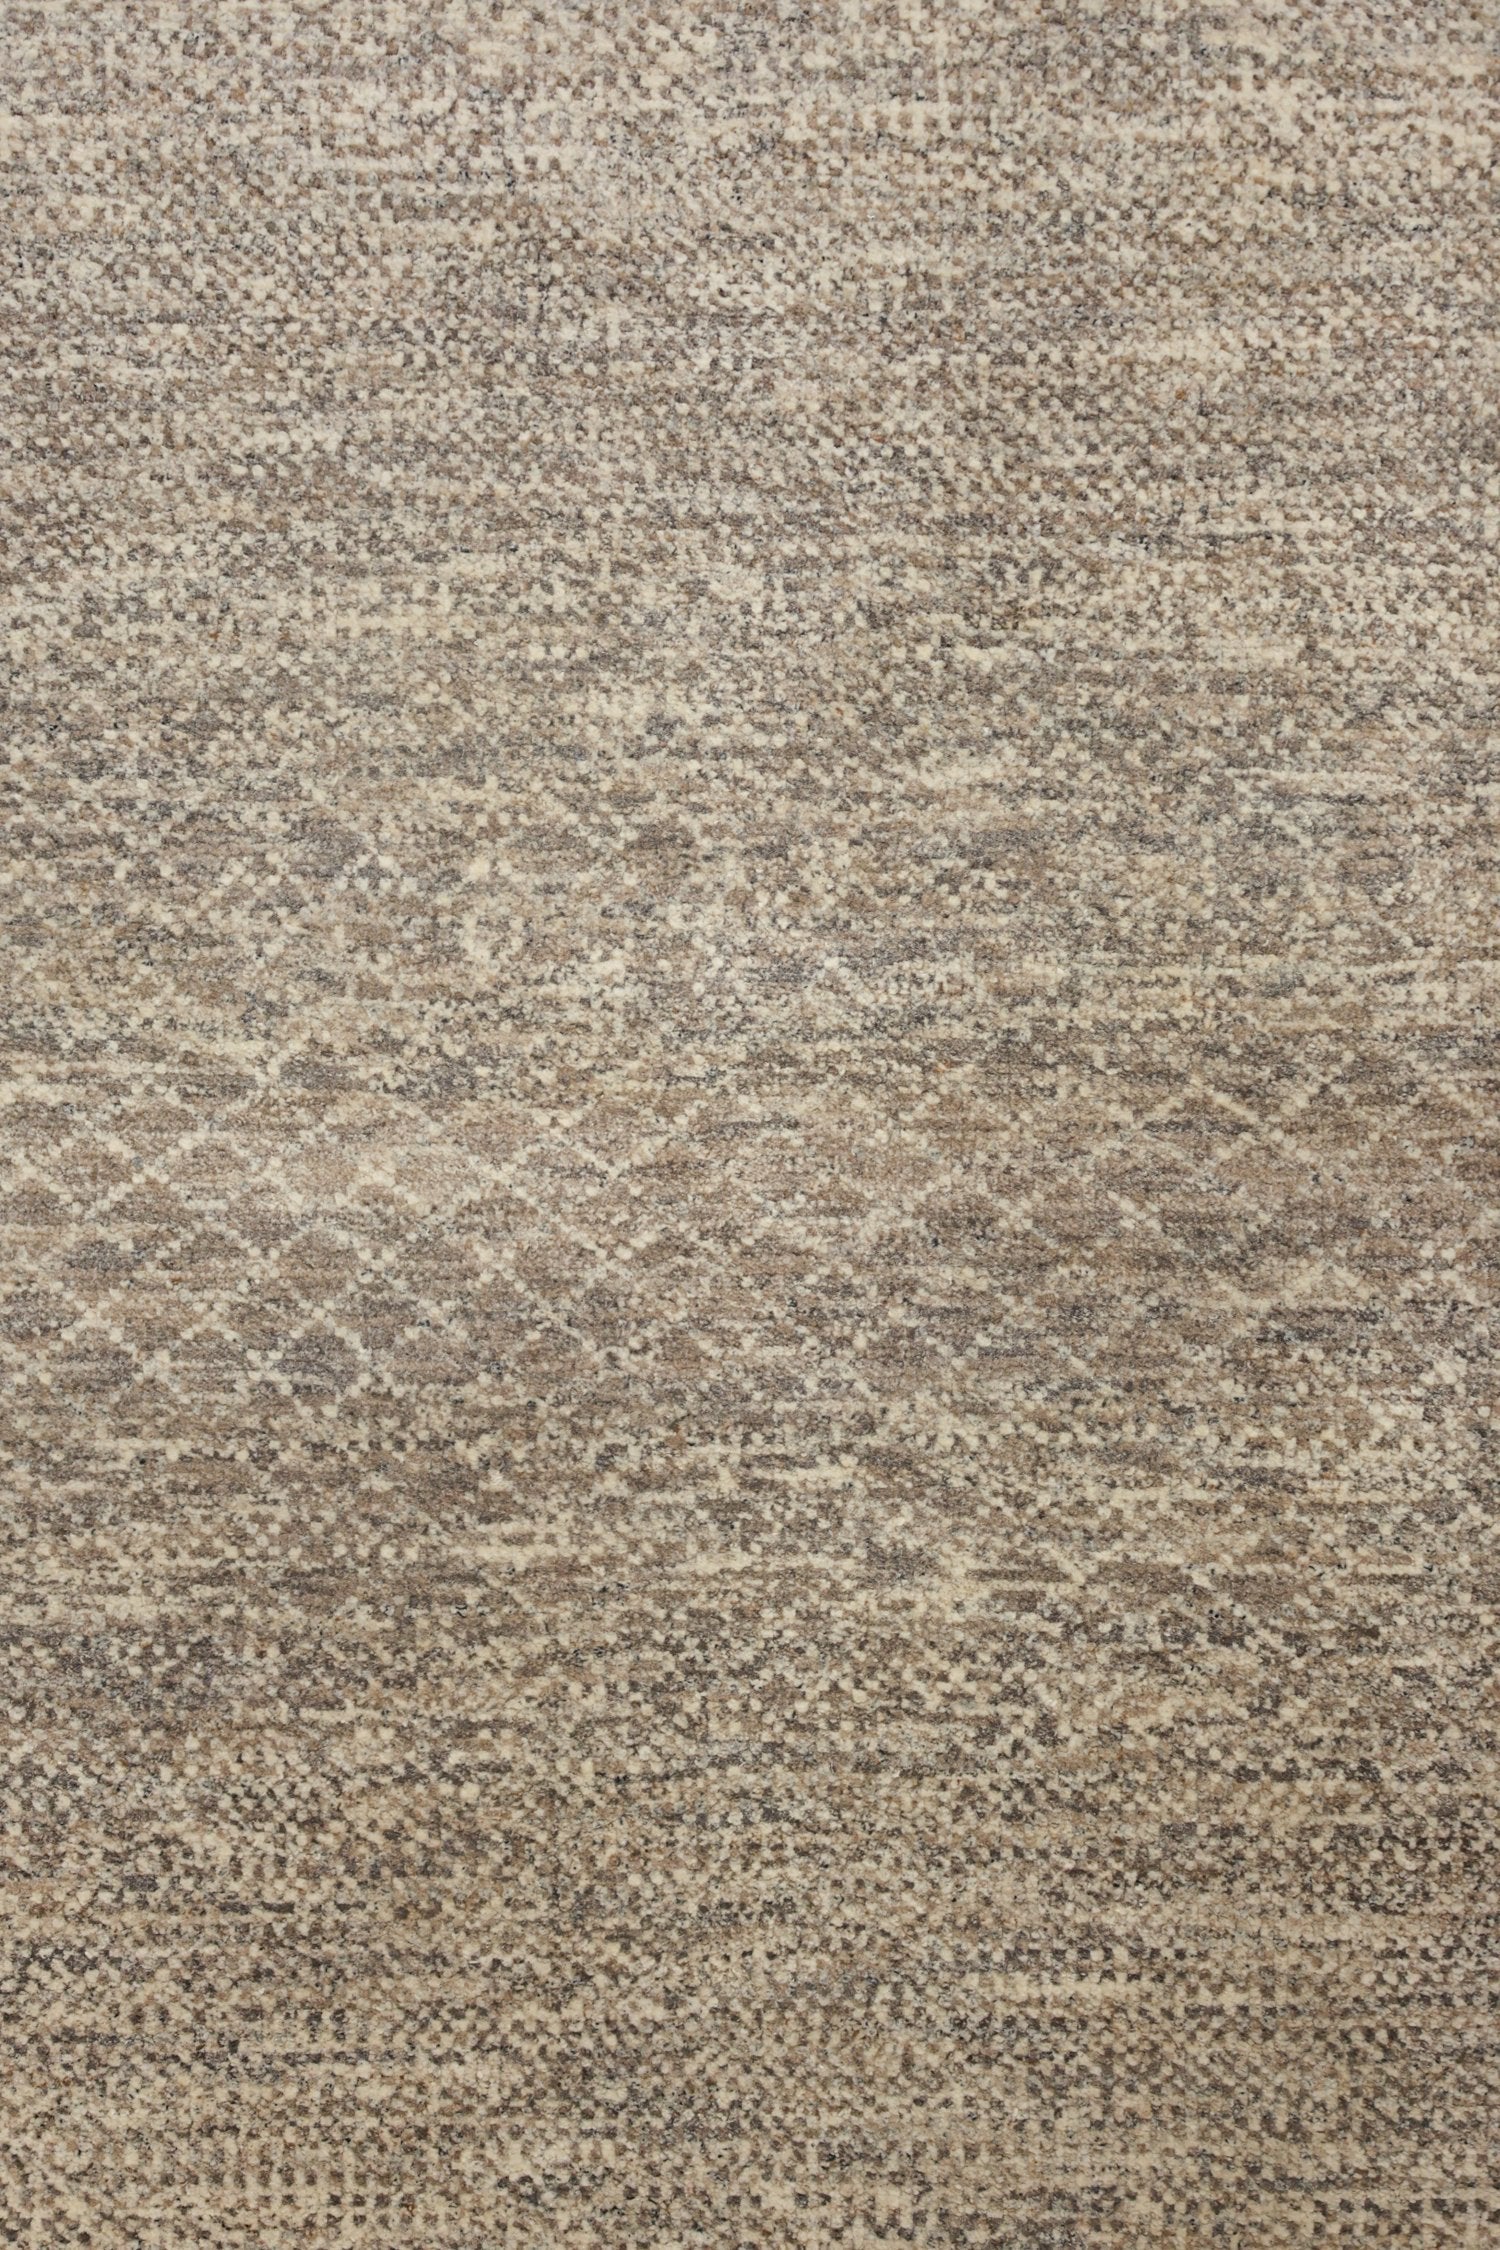 Tides Handwoven Contemporary Rug, J72485